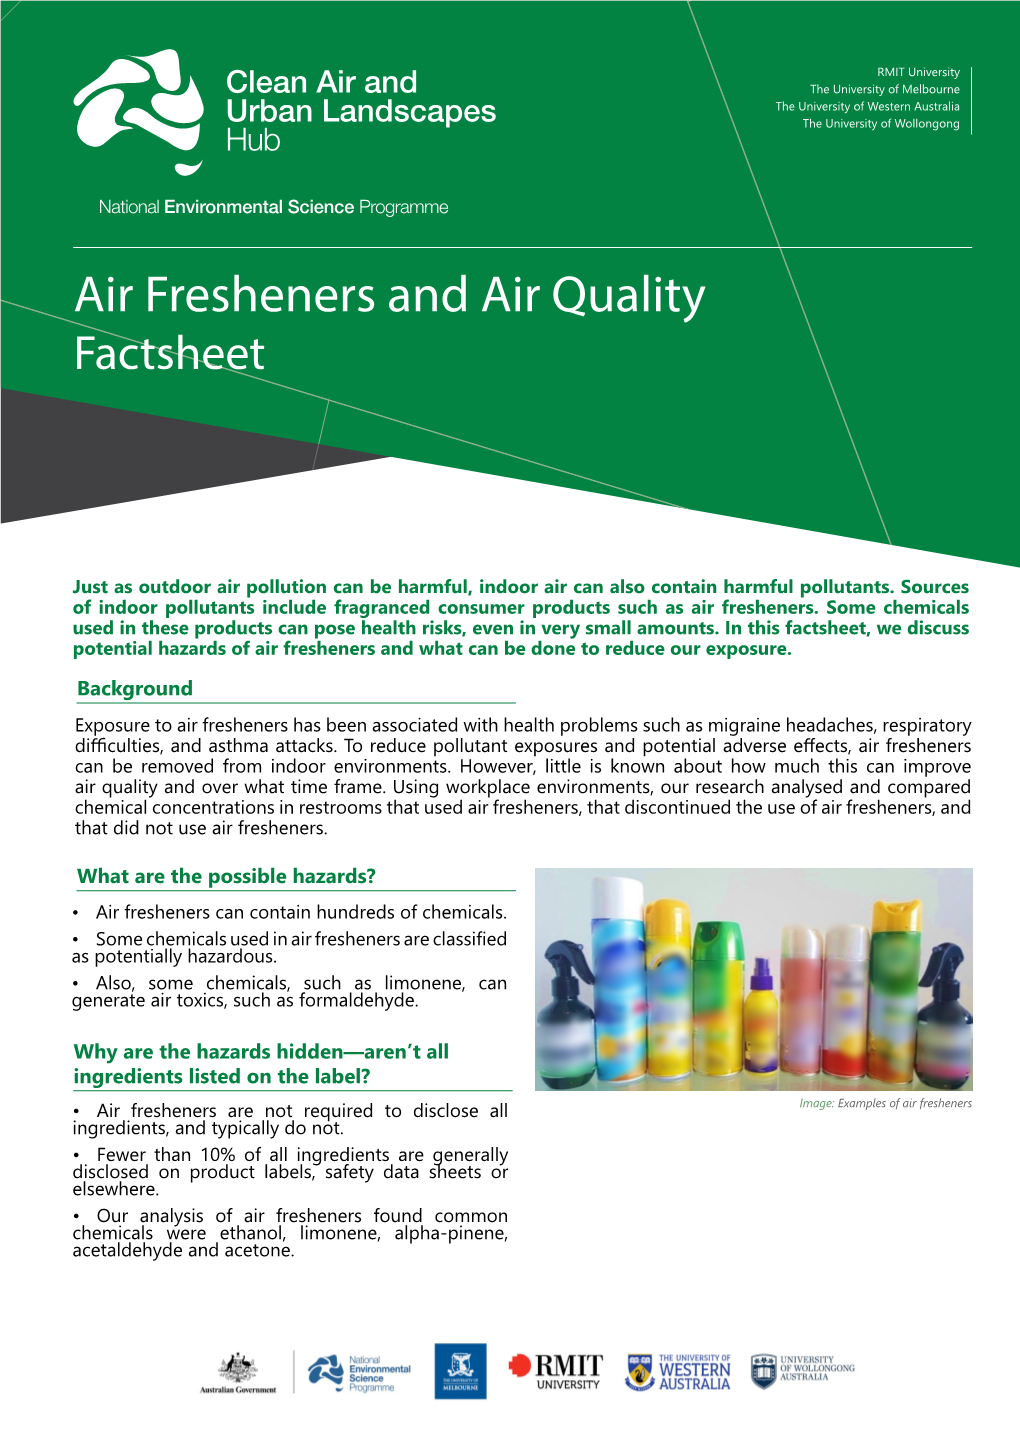 Air Fresheners and Air Quality Factsheet